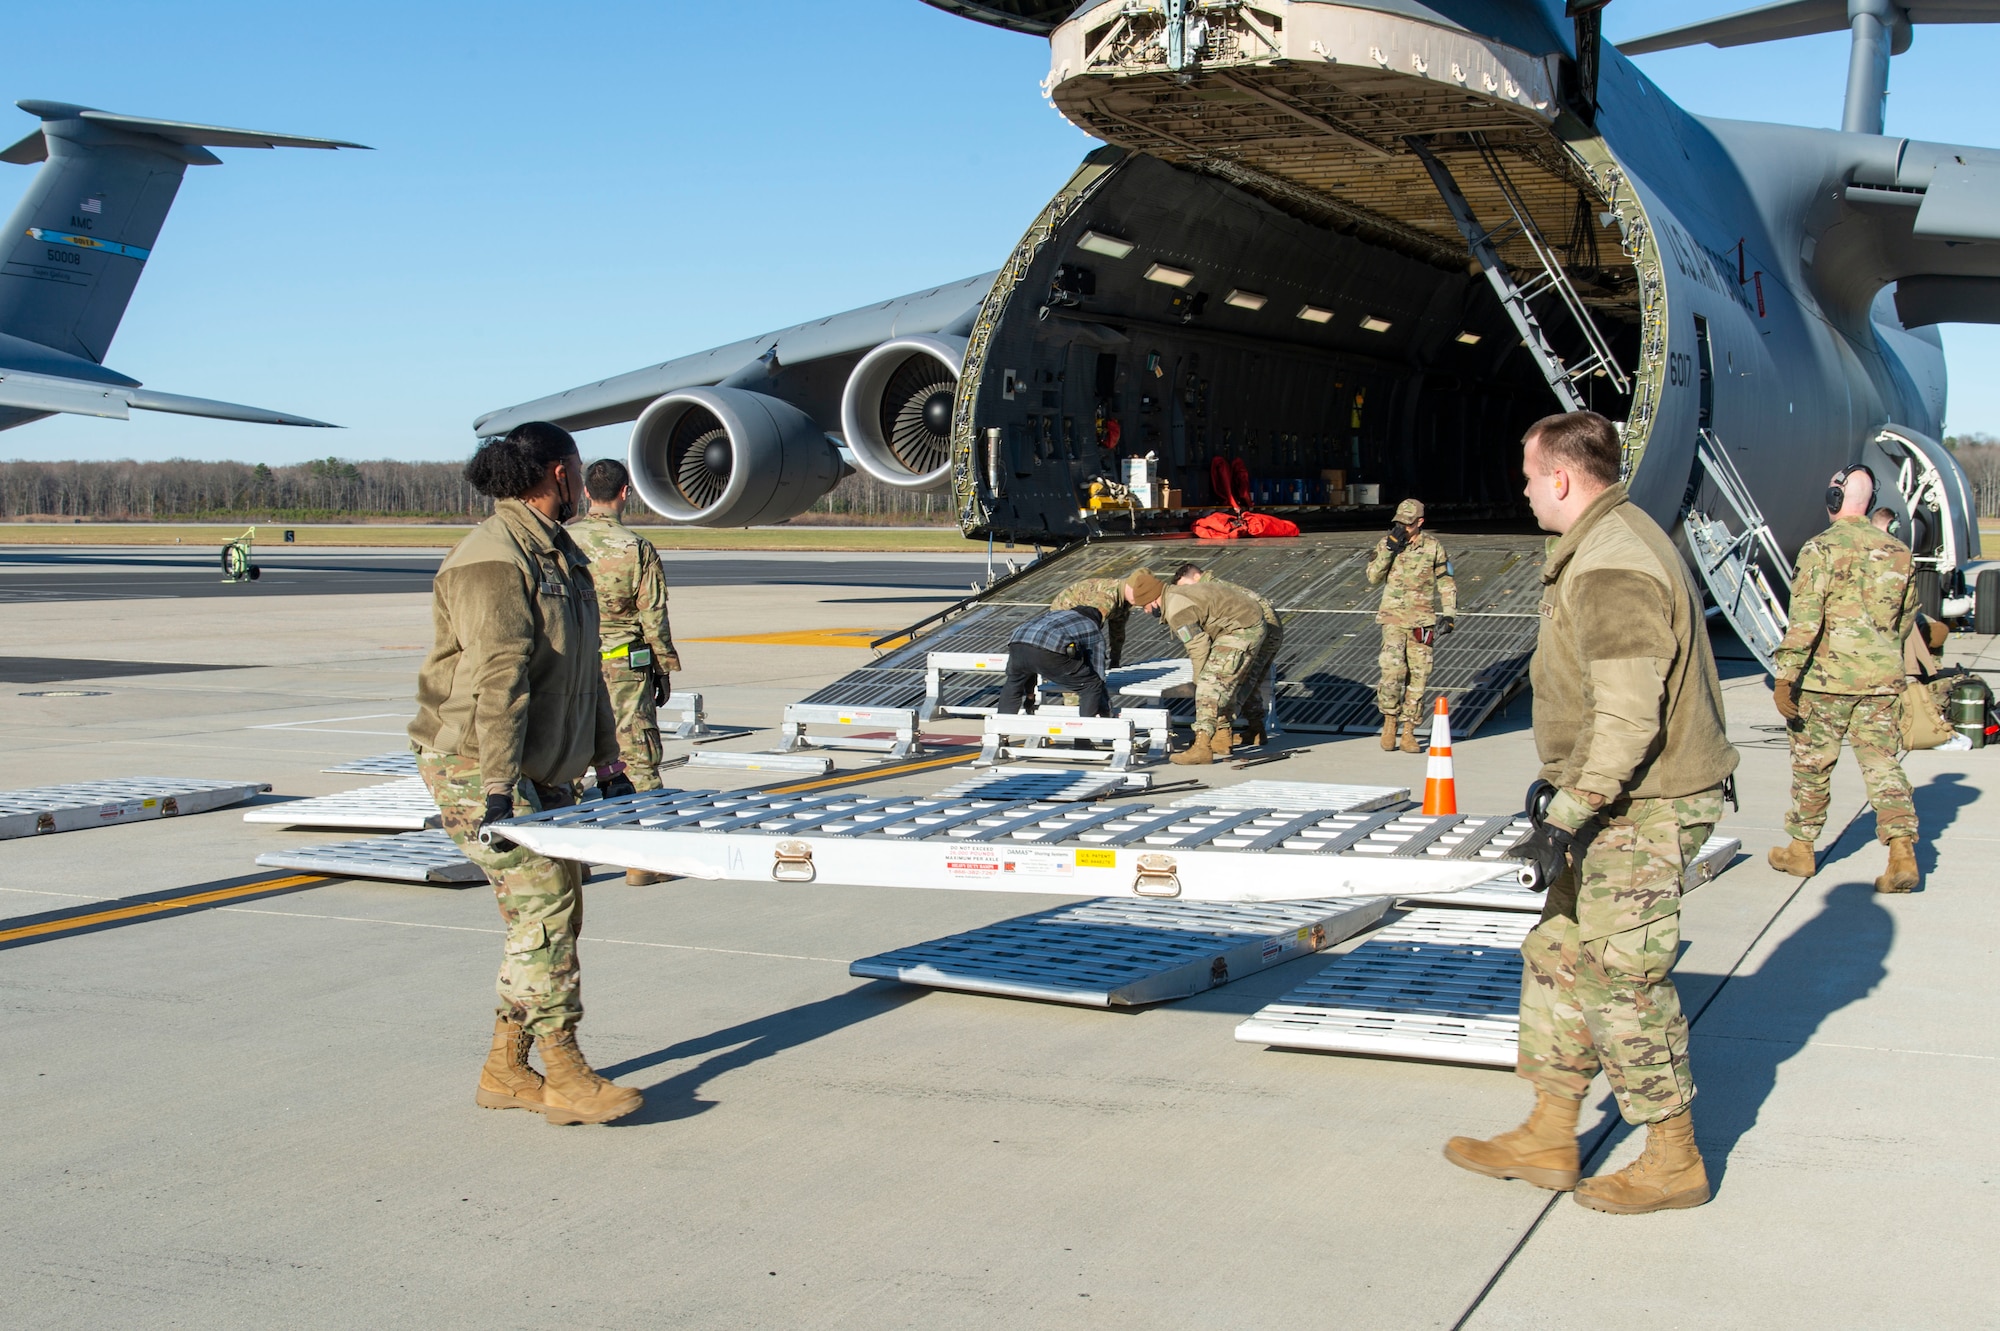 Ramp services personnel from the 436th Aerial Port Squadron place a modular ramp system in position to facilitate the loading of water filtration equipment to a C-5M Super Galaxy at Dover Air Force Base, Delaware, Dec. 20, 2021. An aircrew from the 9th Airlift Squadron flew the equipment to Joint Base Pearl Harbor-Hickam (JBPHH), Hawaii. The JBPHH water quality recovery is a joint U.S. military initiative working closely with the State of Hawaii, Department of Health, Honolulu Board of Water Supply, U.S. government and independent organizations to restore a safe water delivery system to JBPHH military housing communities through testing, treatment, and repair. For detailed information, including available resources and locations, and news, go to www.navy.mil/jointbasewater.   (U.S. Air Force photo by Roland Balik)(This photo has been altered for security purposes by blurring out identification badges.)